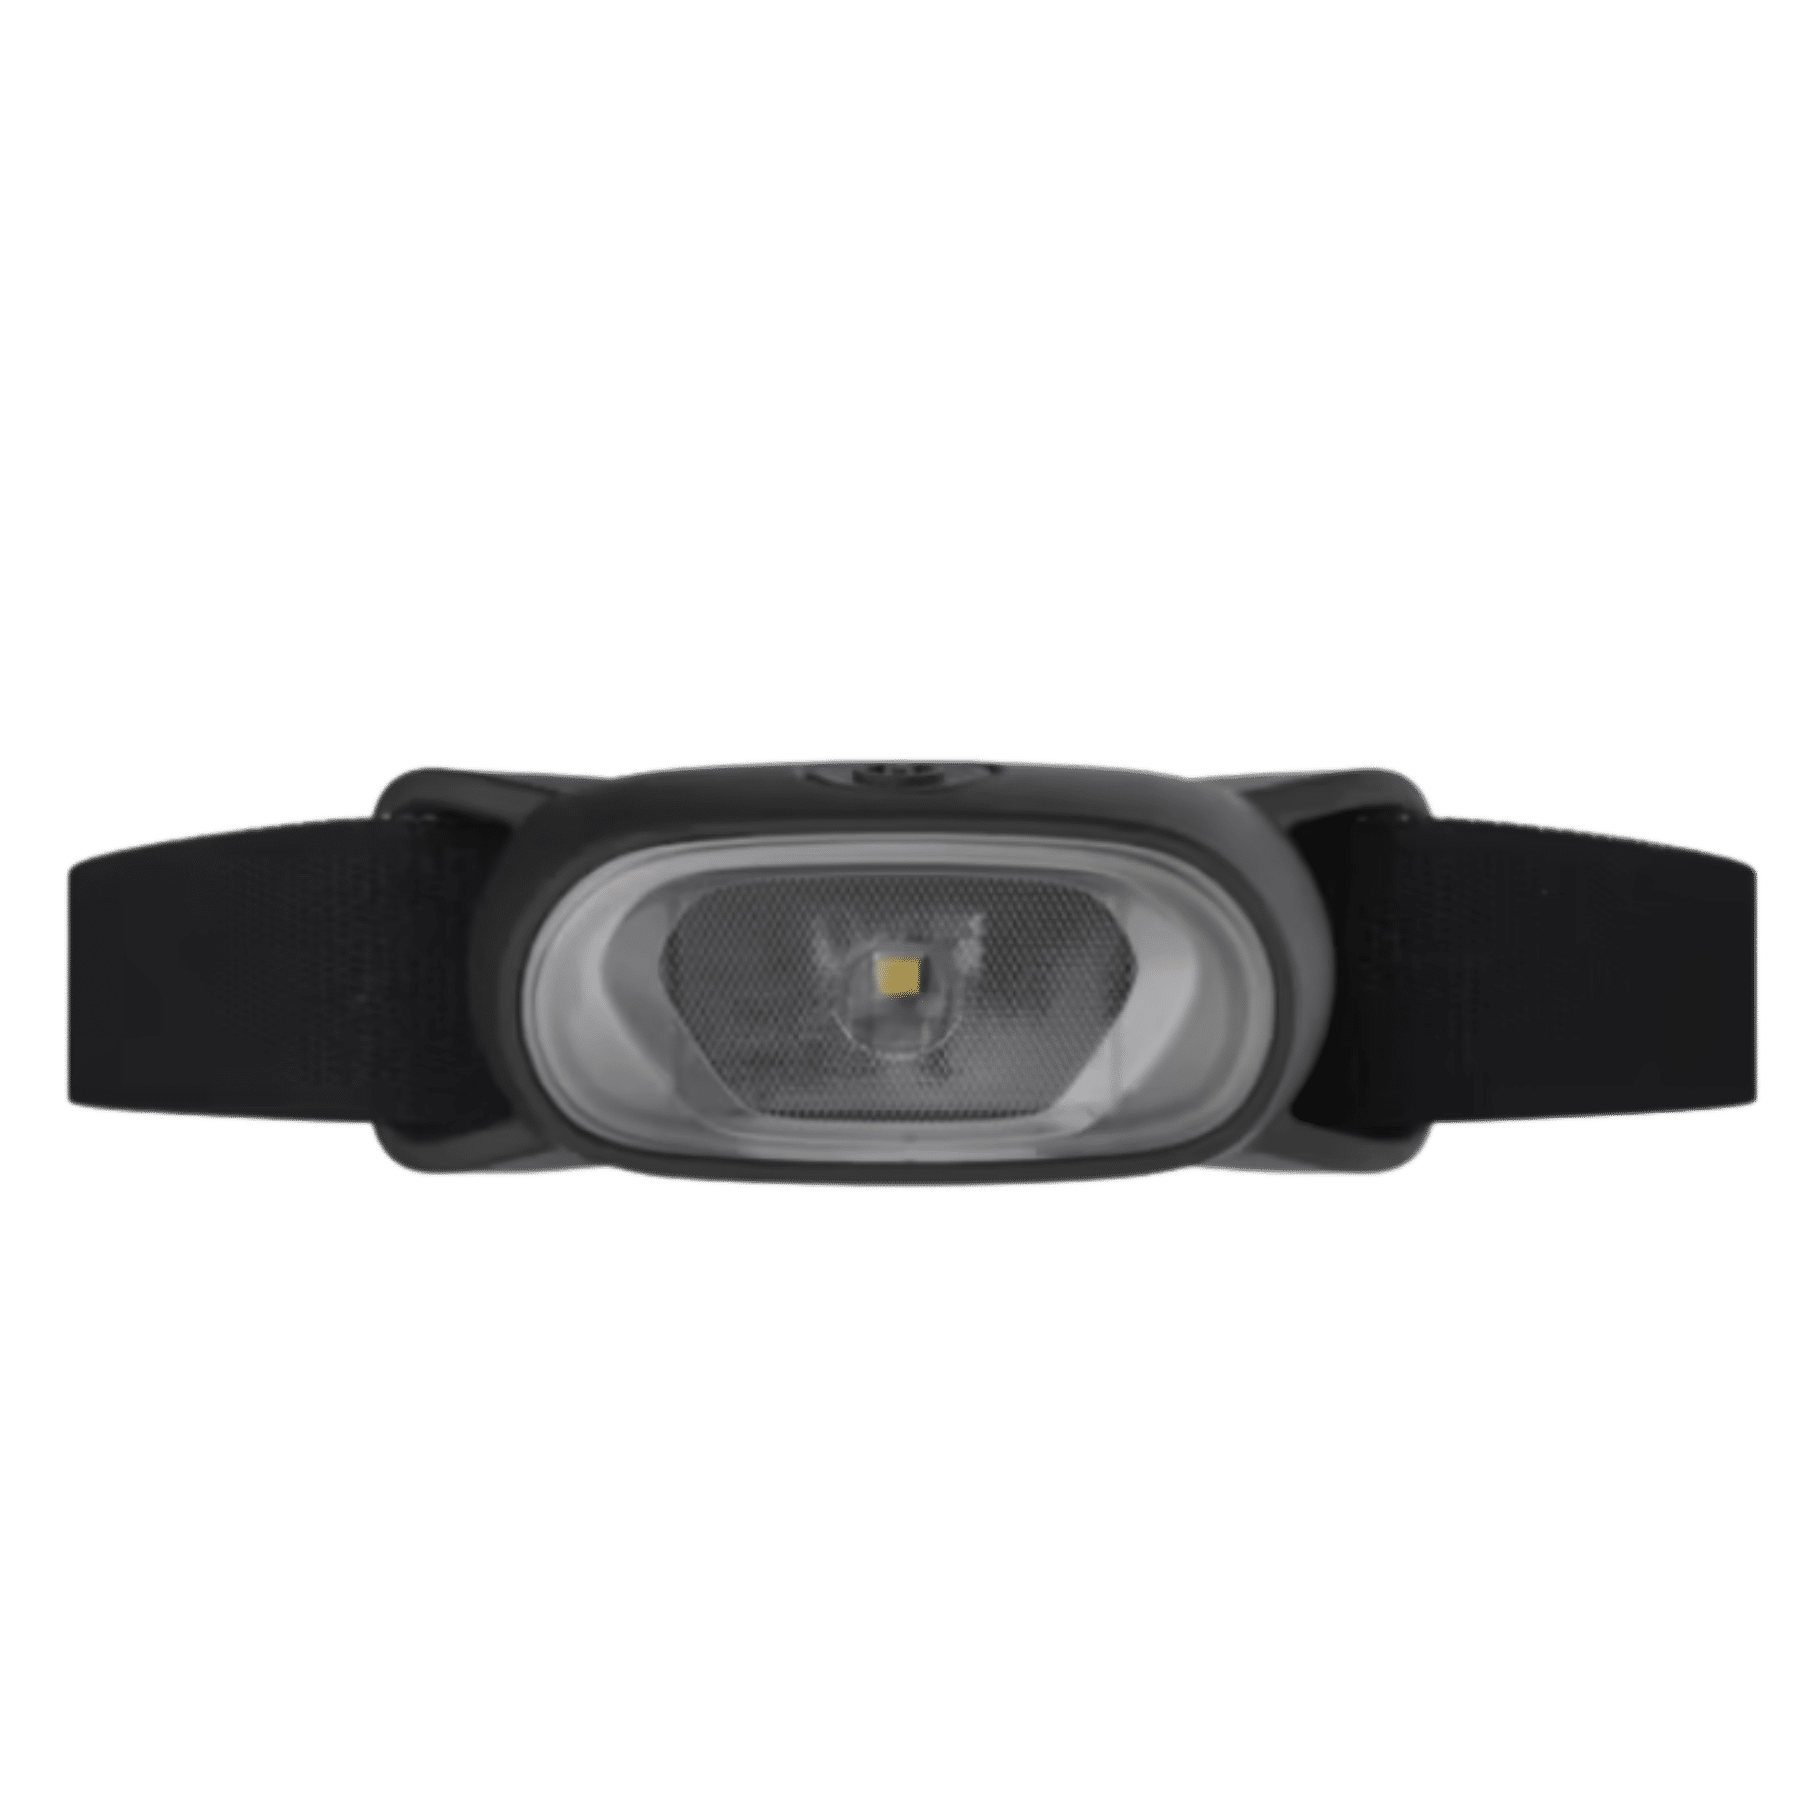 These are product images of Headtorch on rent by SharePal in Bangalore.